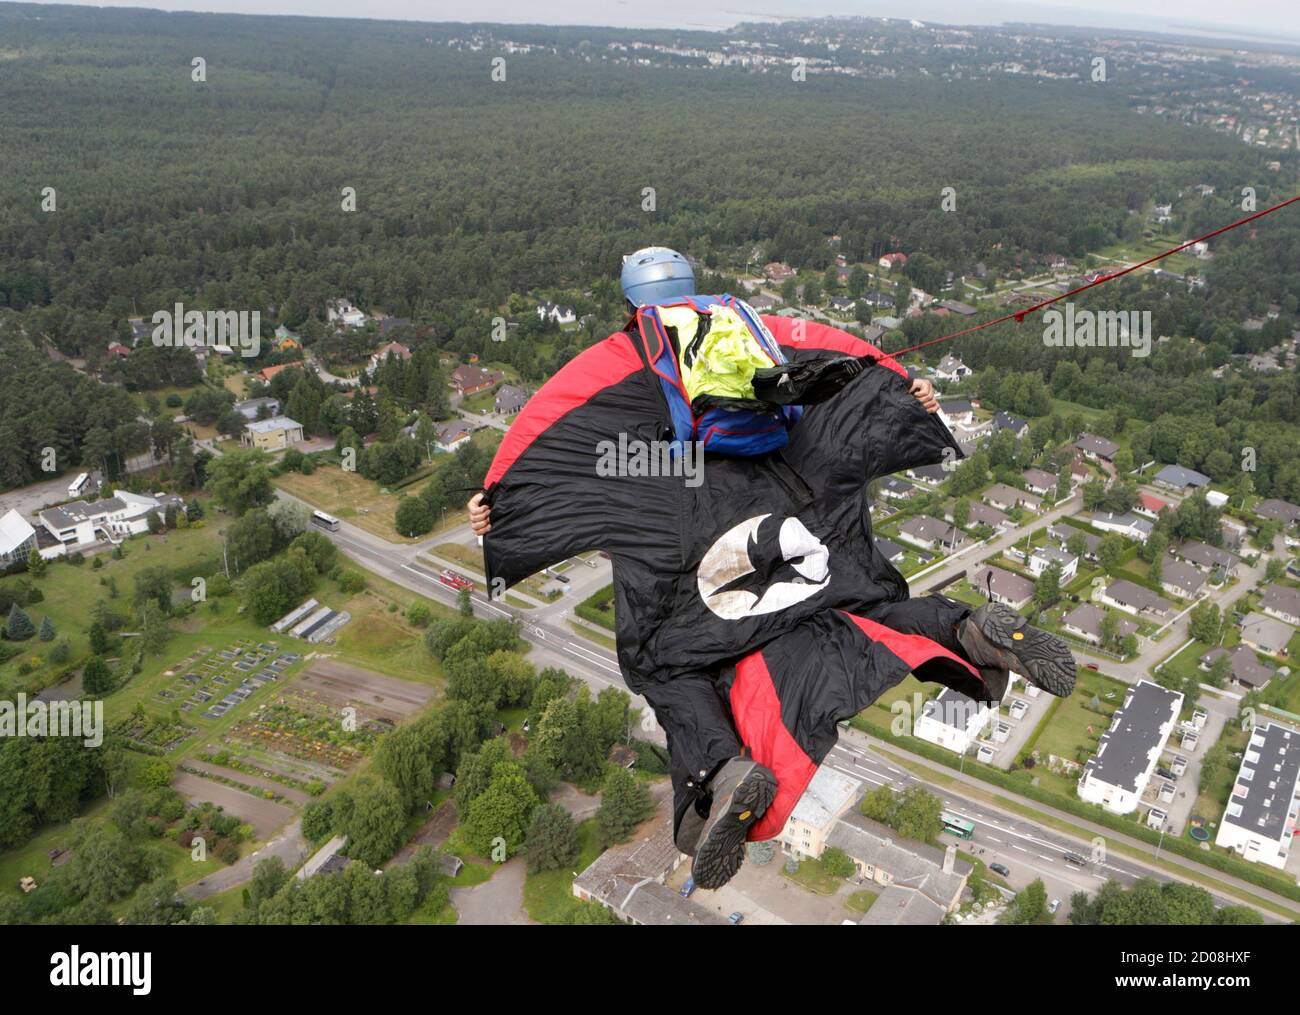 BASE jumper Semjon Lazarev of Russia wears an outfit modelled after a Batman  suit as he leaps before opening his parachute during Tallinn TV Tower  B.A.S.E. Boogie 2013 event July 11, 2013.